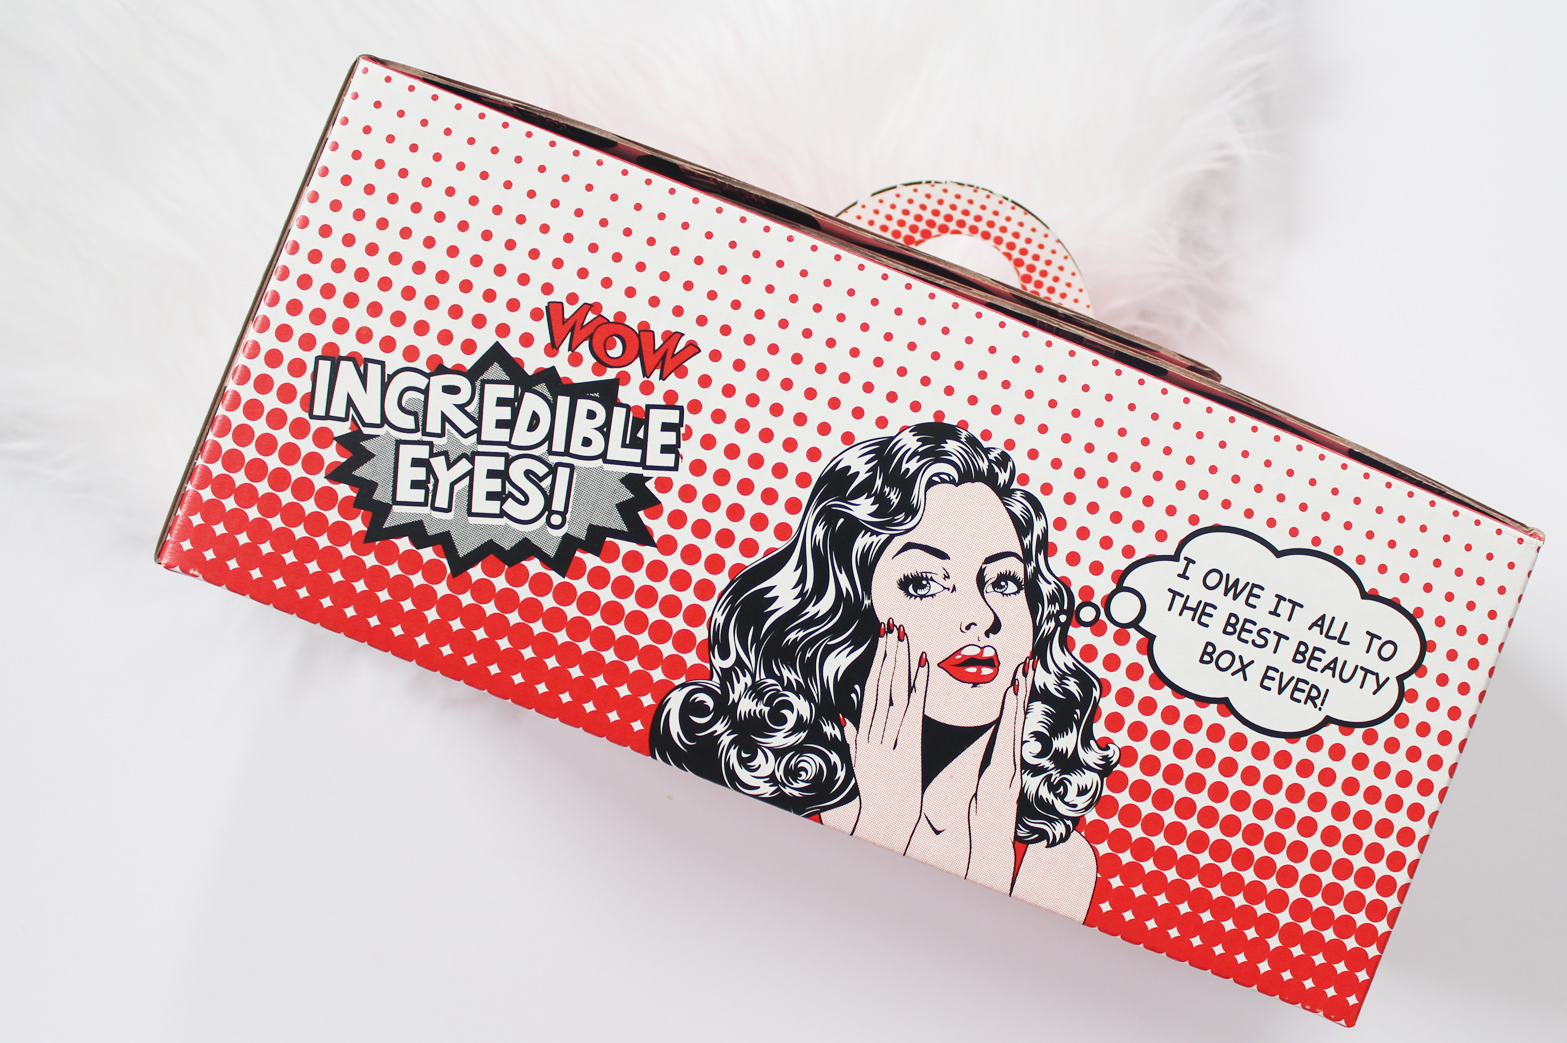 THE BEST BEAUTY BOX EVER! | Incredible Eyes Box Unboxing + Giveaway! - CassandraMyee